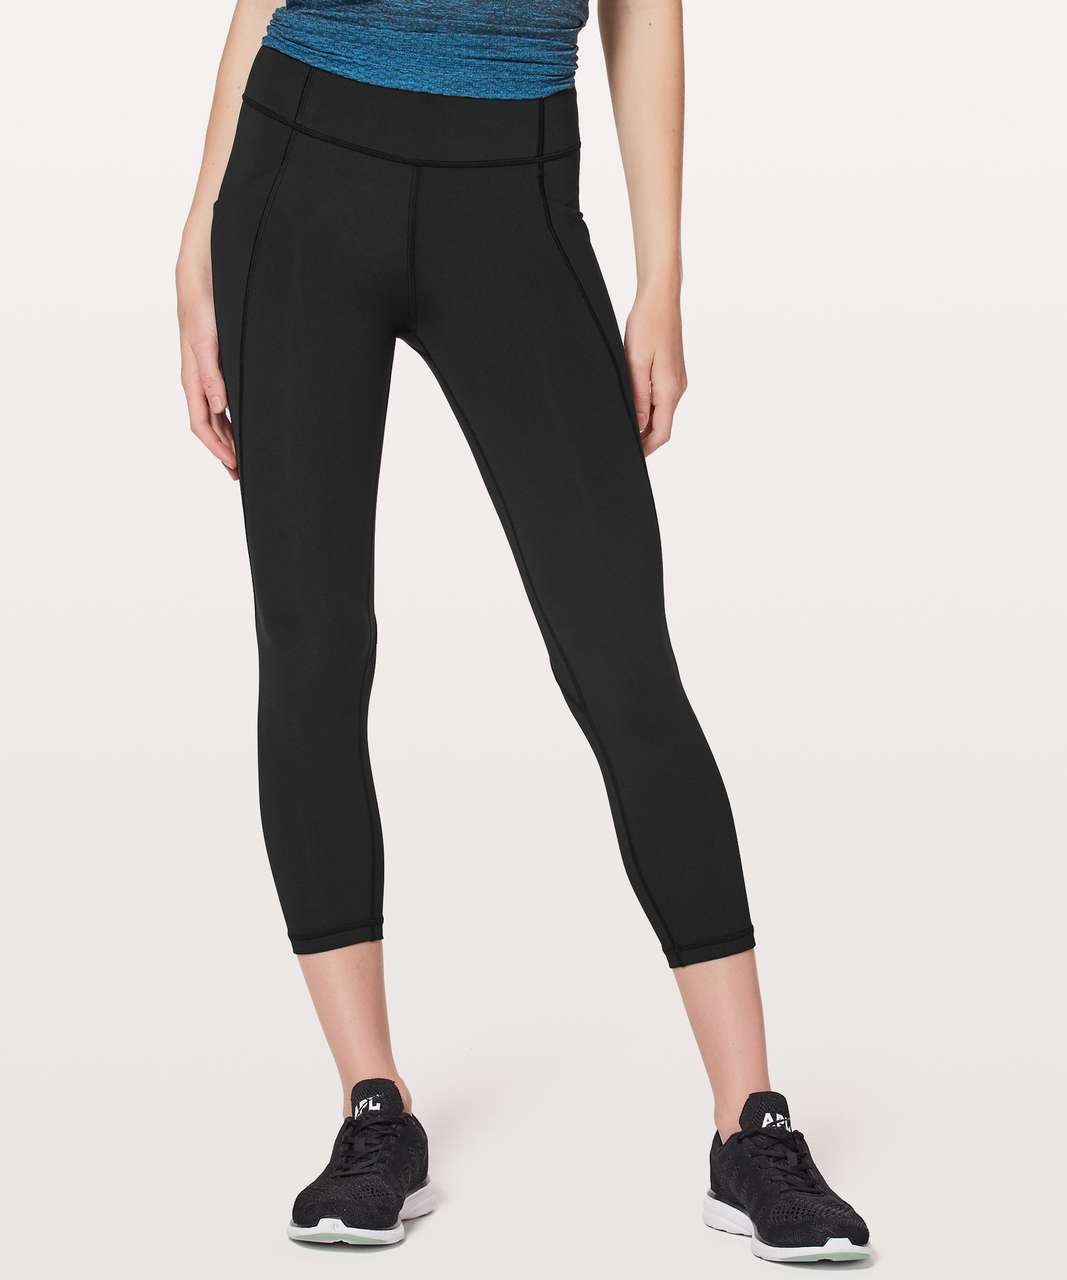 lululemon time to sweat crop review